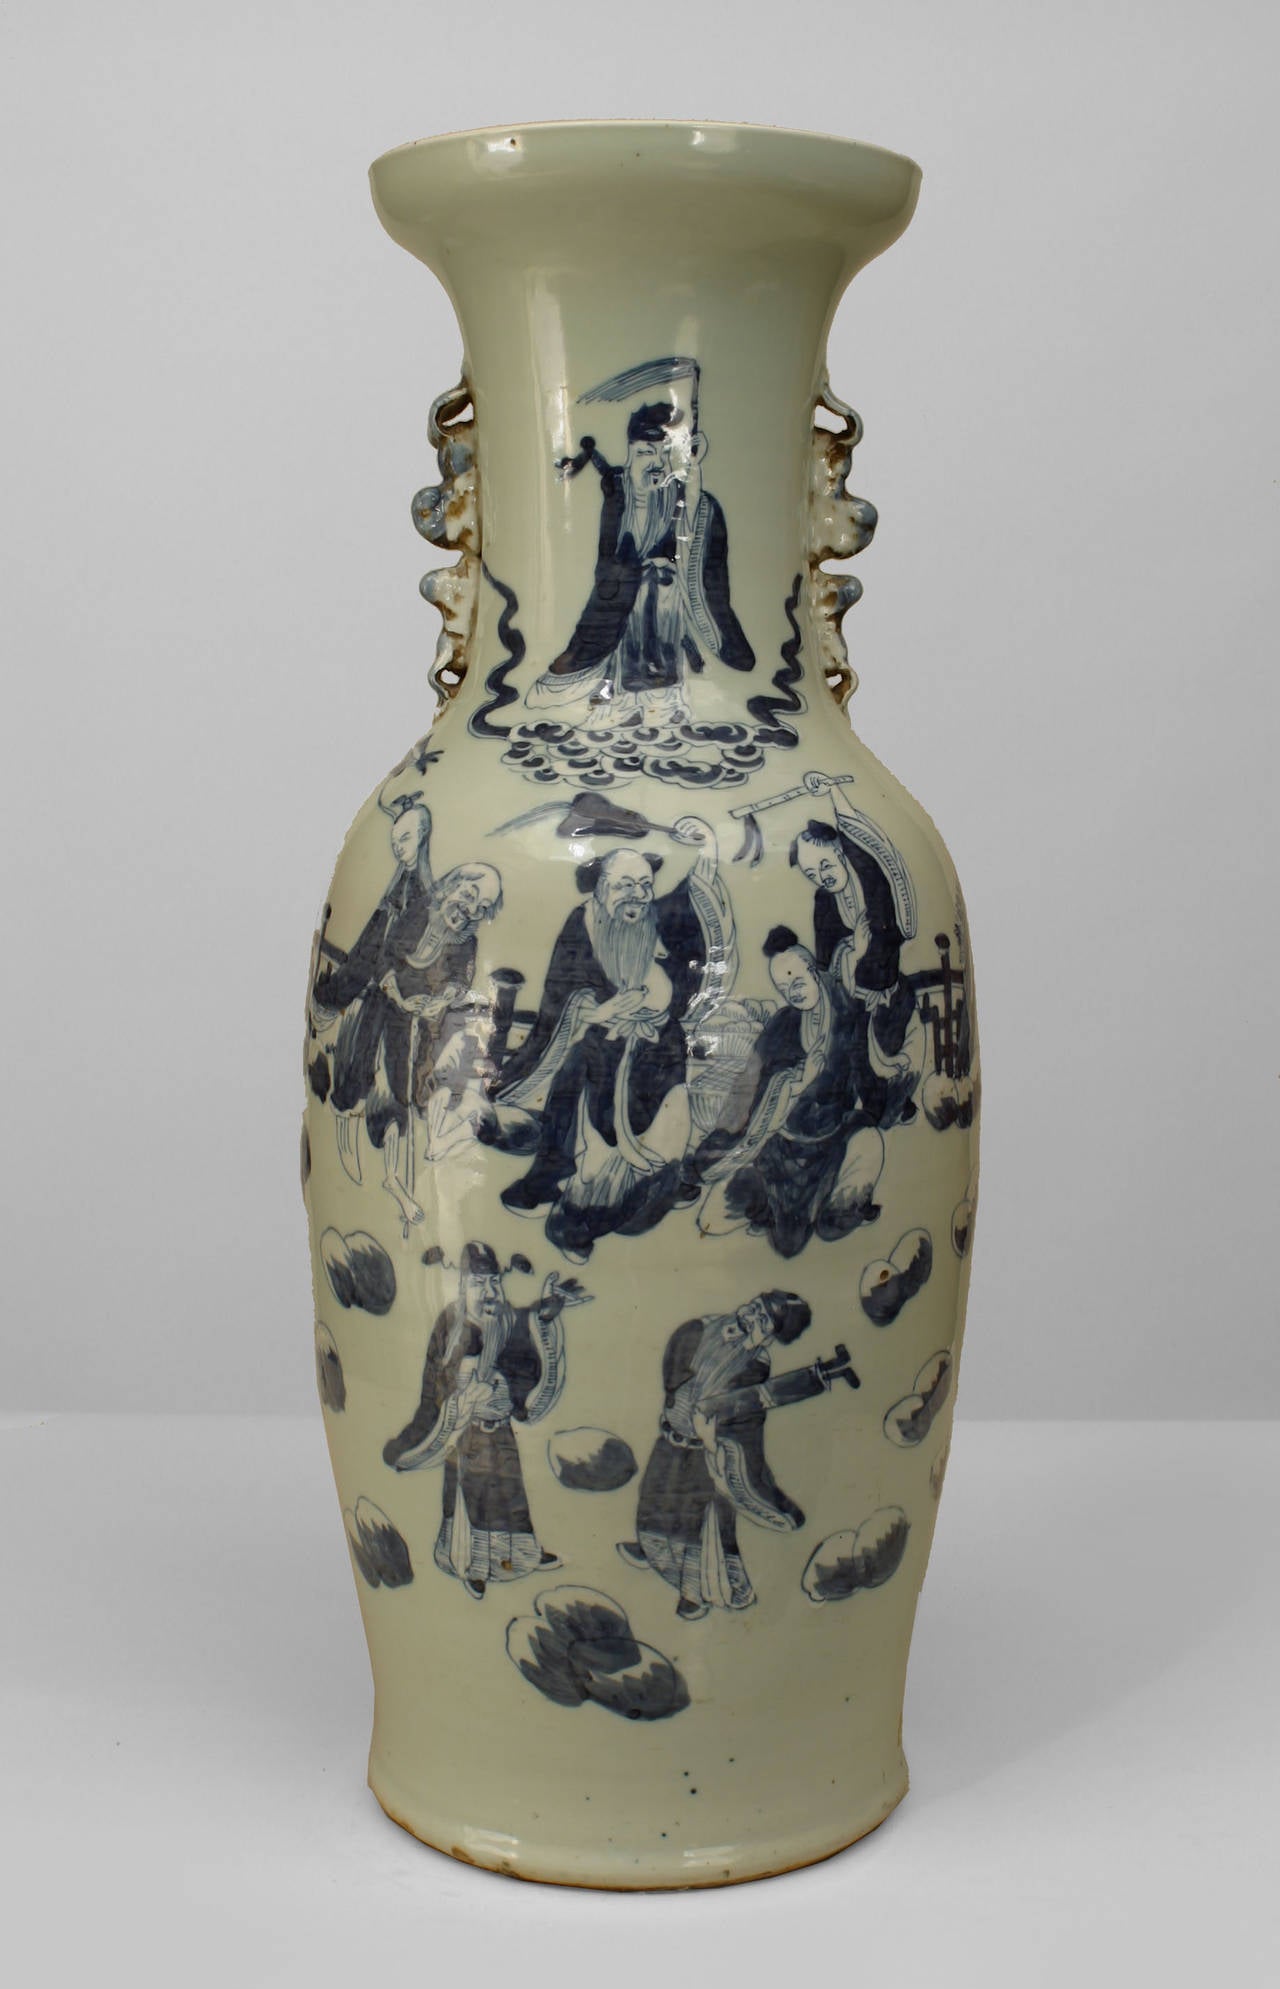 Chinese (20th Cent) porcelain vase with small side handles. The vase is painted  celedon and is decorated with traditional genre scenes in blue paint.